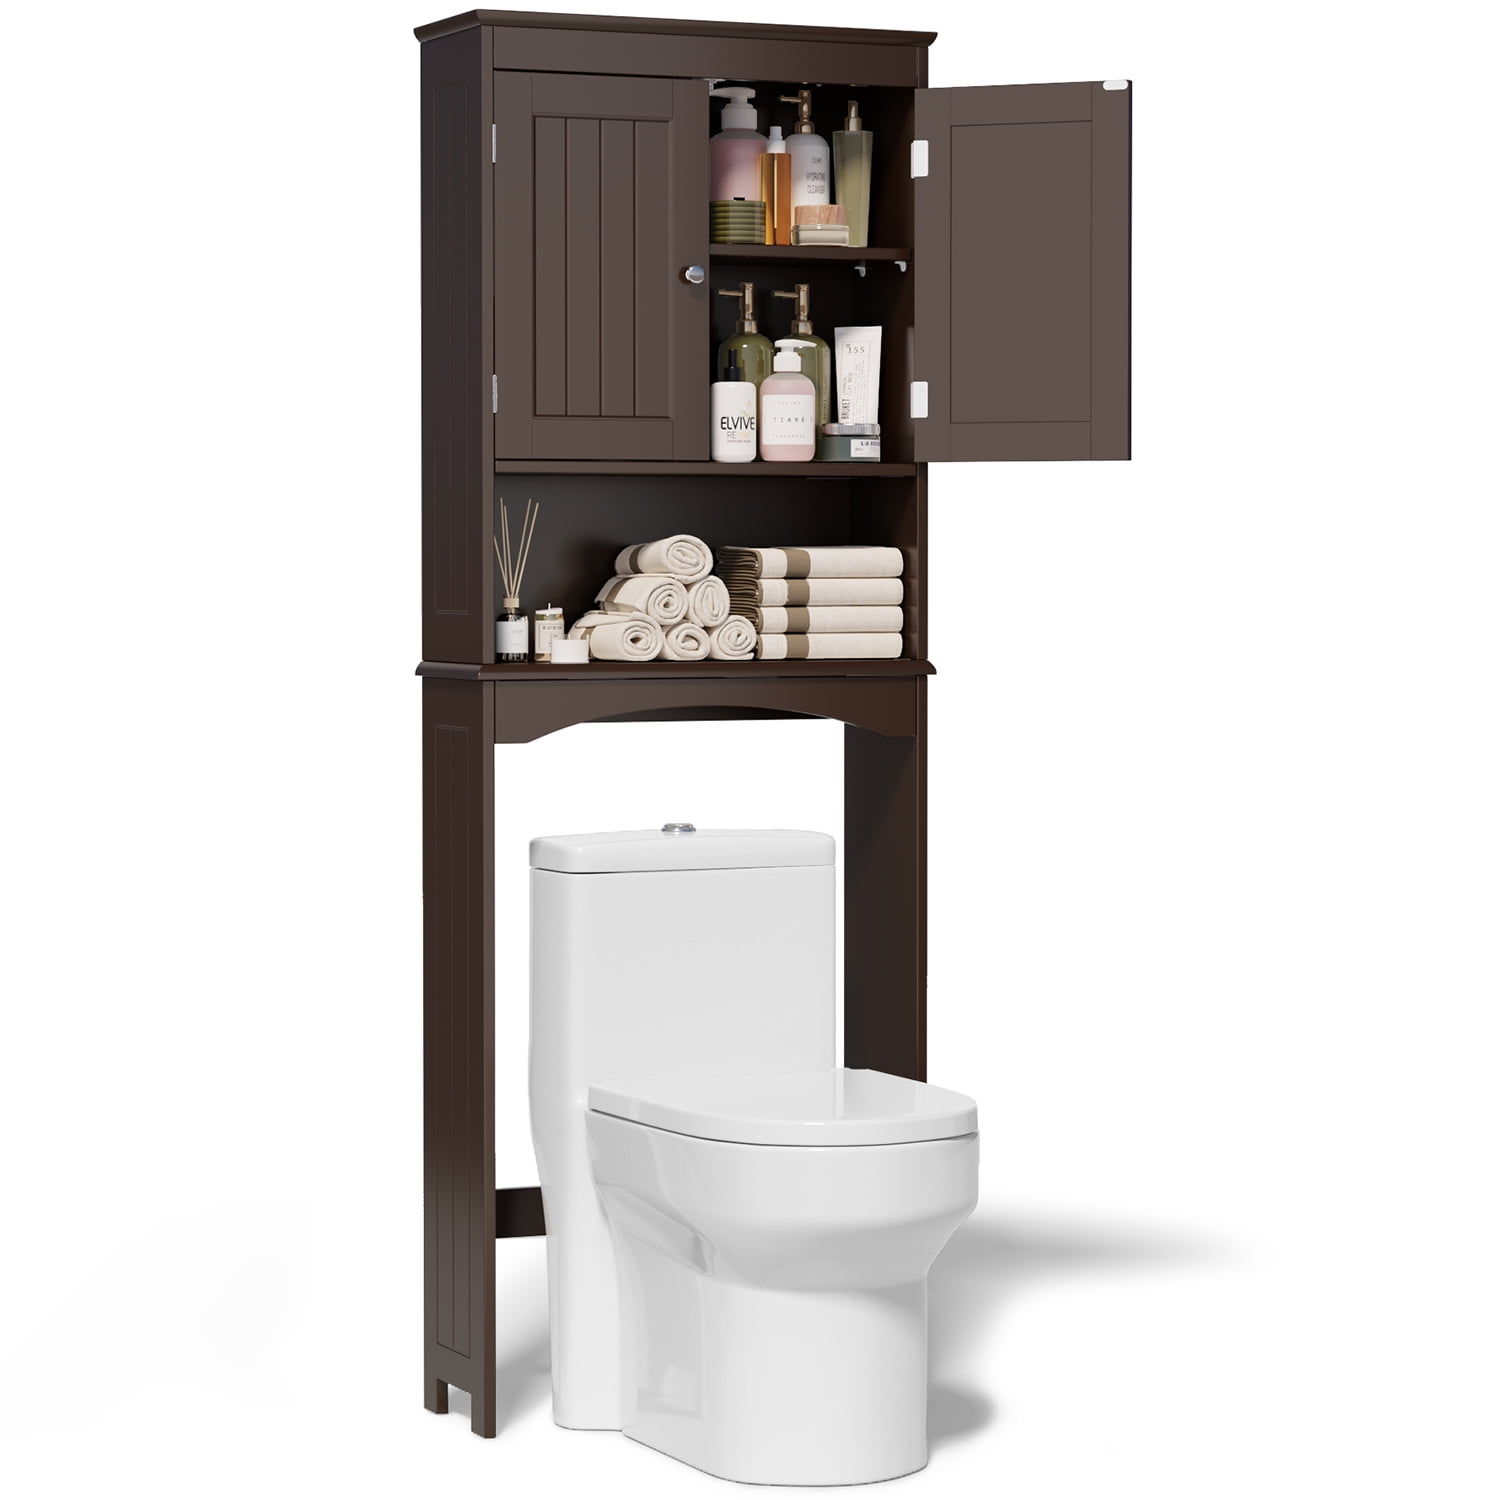 Over-the-Toilet Storage Cabinet - Lifewit – Lifewitstore